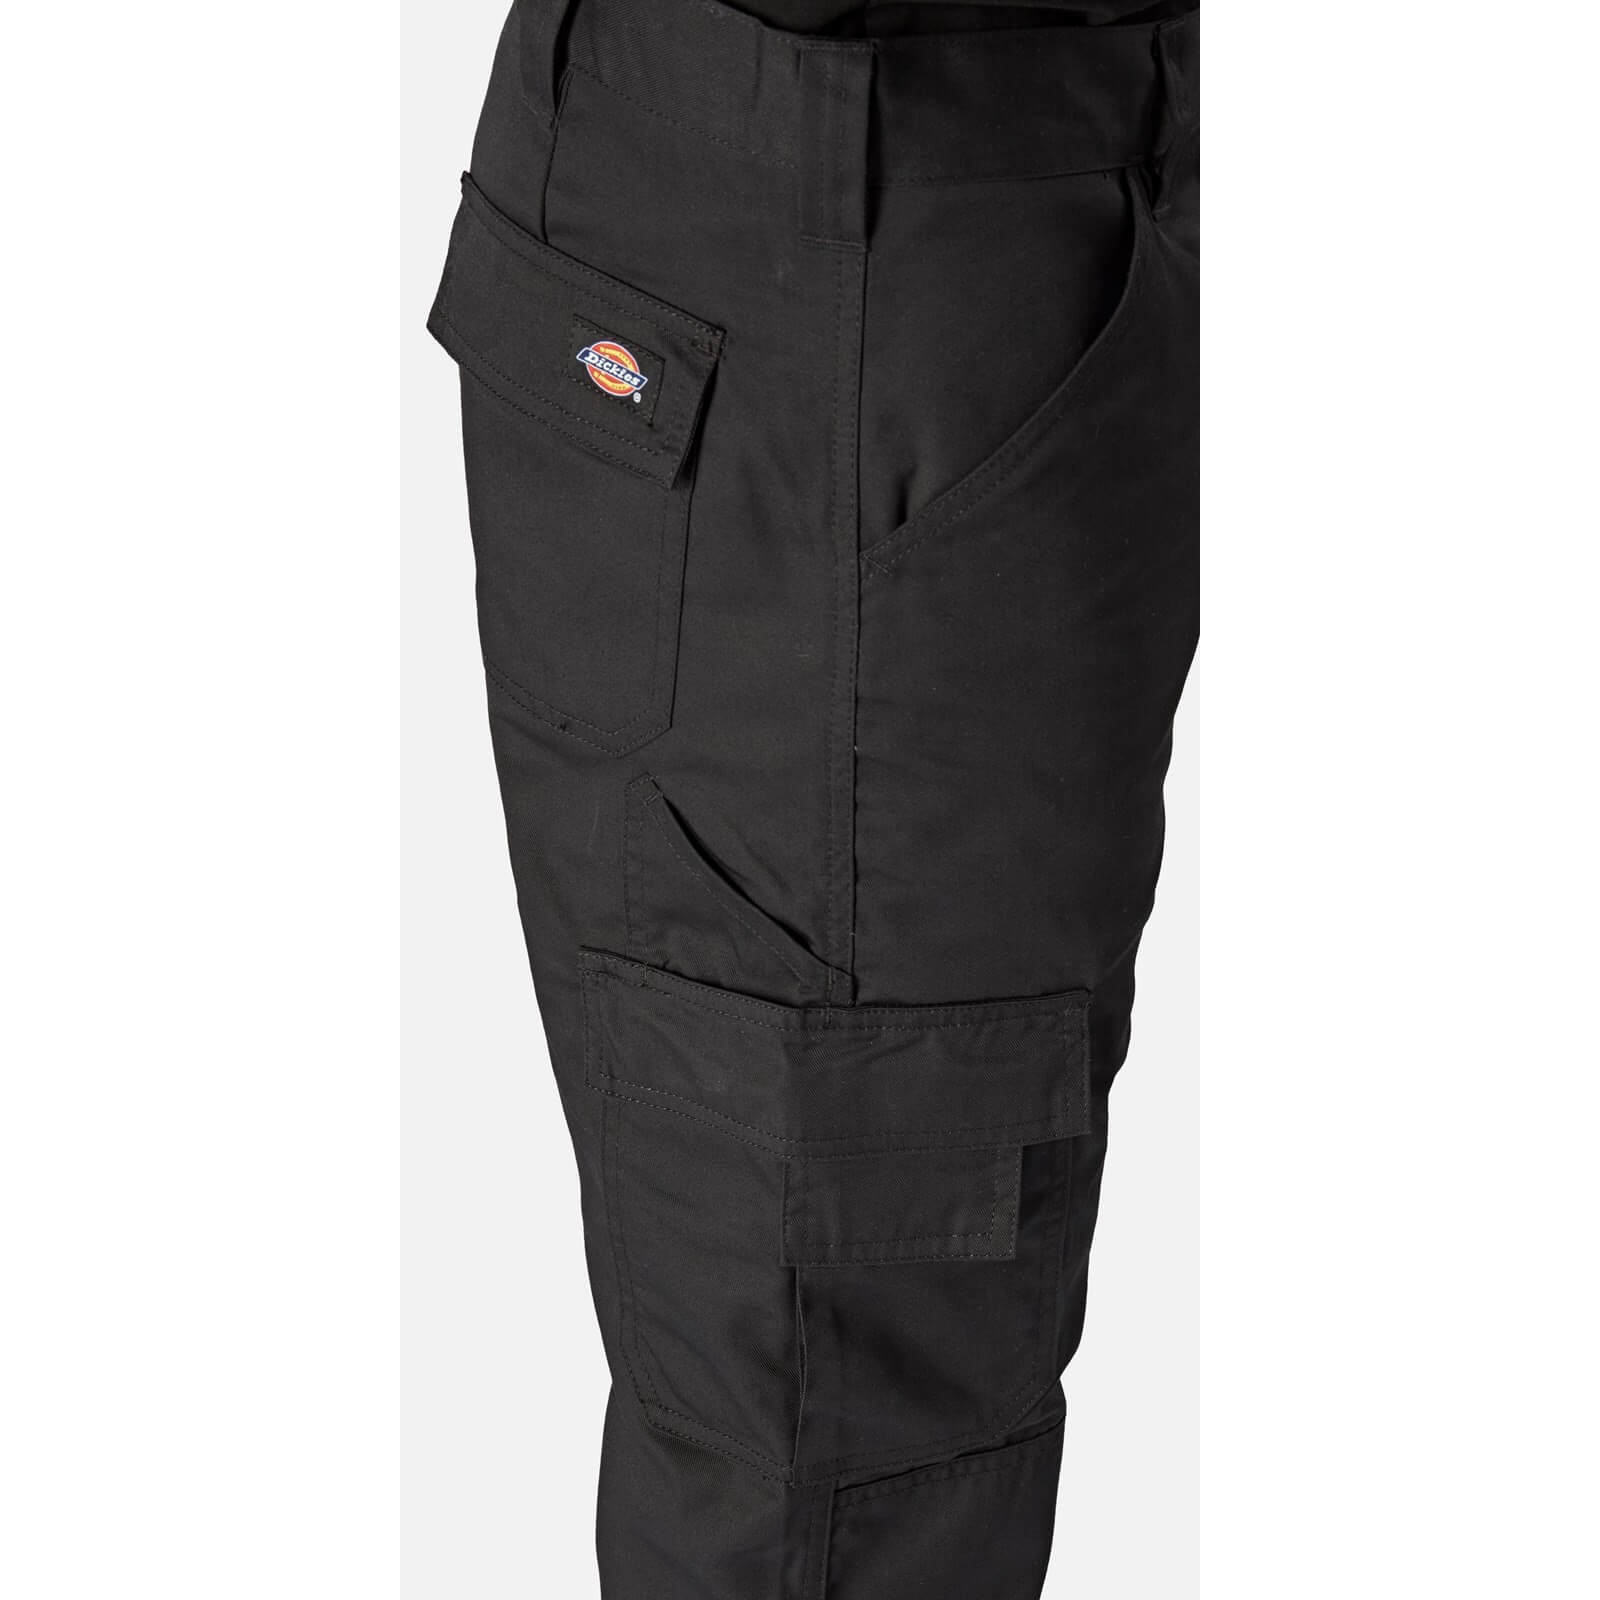 Dickies Workwear Everyday Trousers Black  TED24 Sports